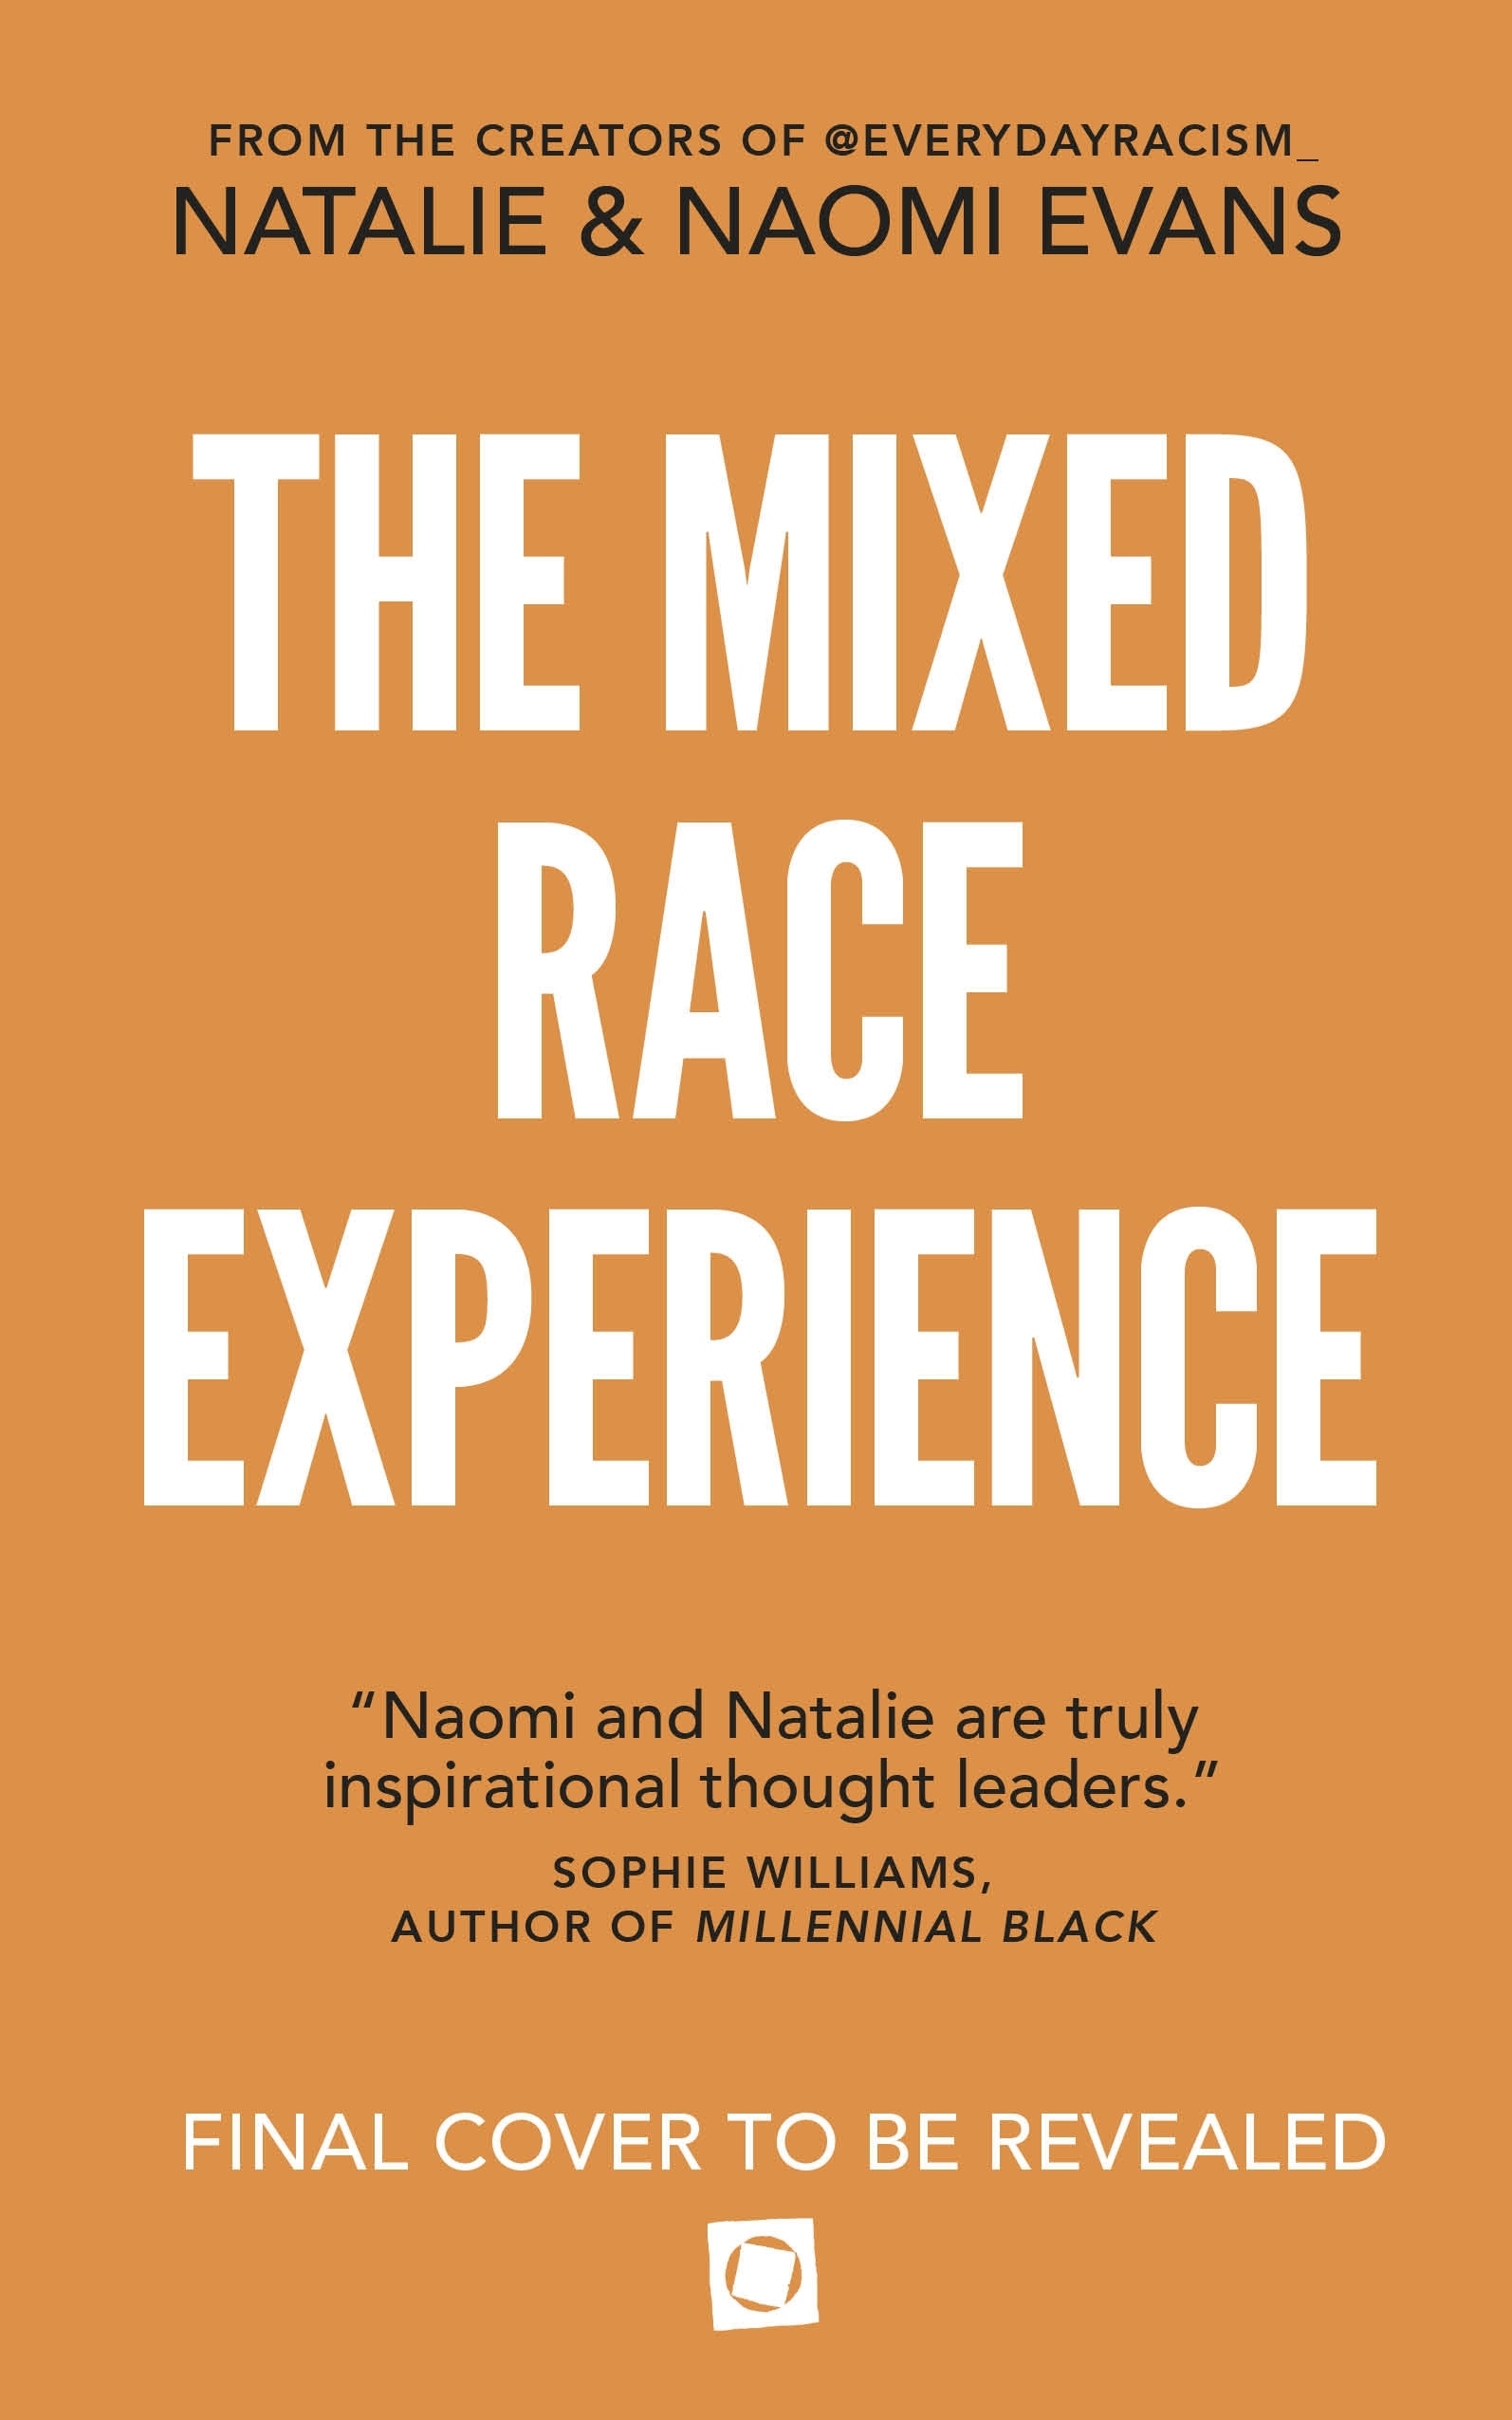 Book “The Mixed Race Experience” by Natalie Evans, Naomi Evans — February 17, 2022